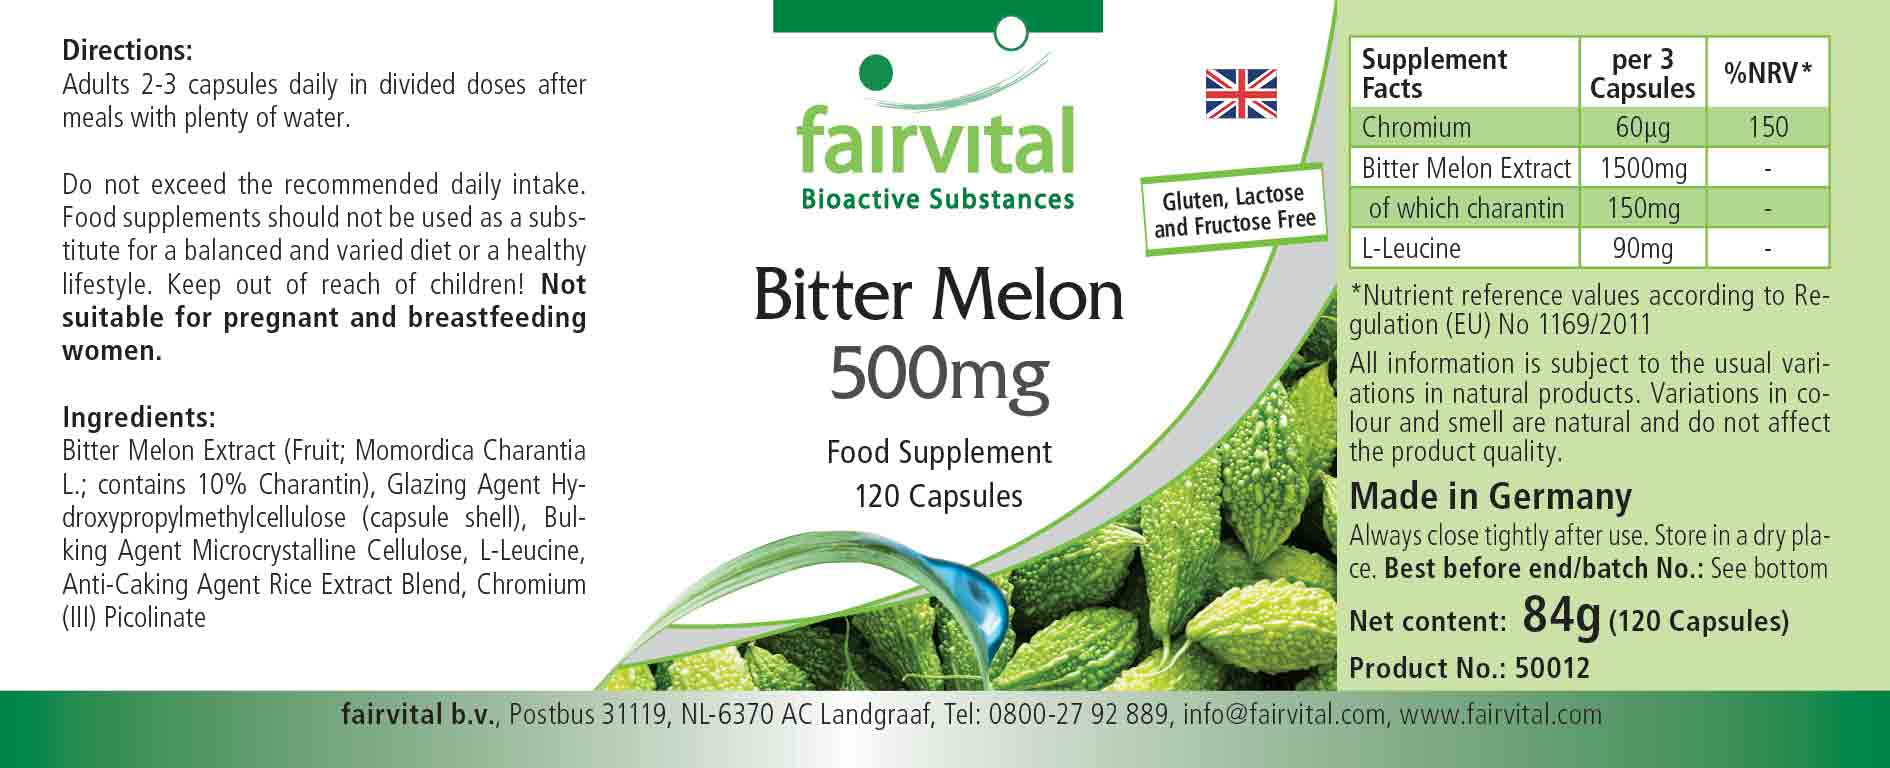 Bitter melon 500mg with chromium - 120 capsules - Sale - MHD 05/25